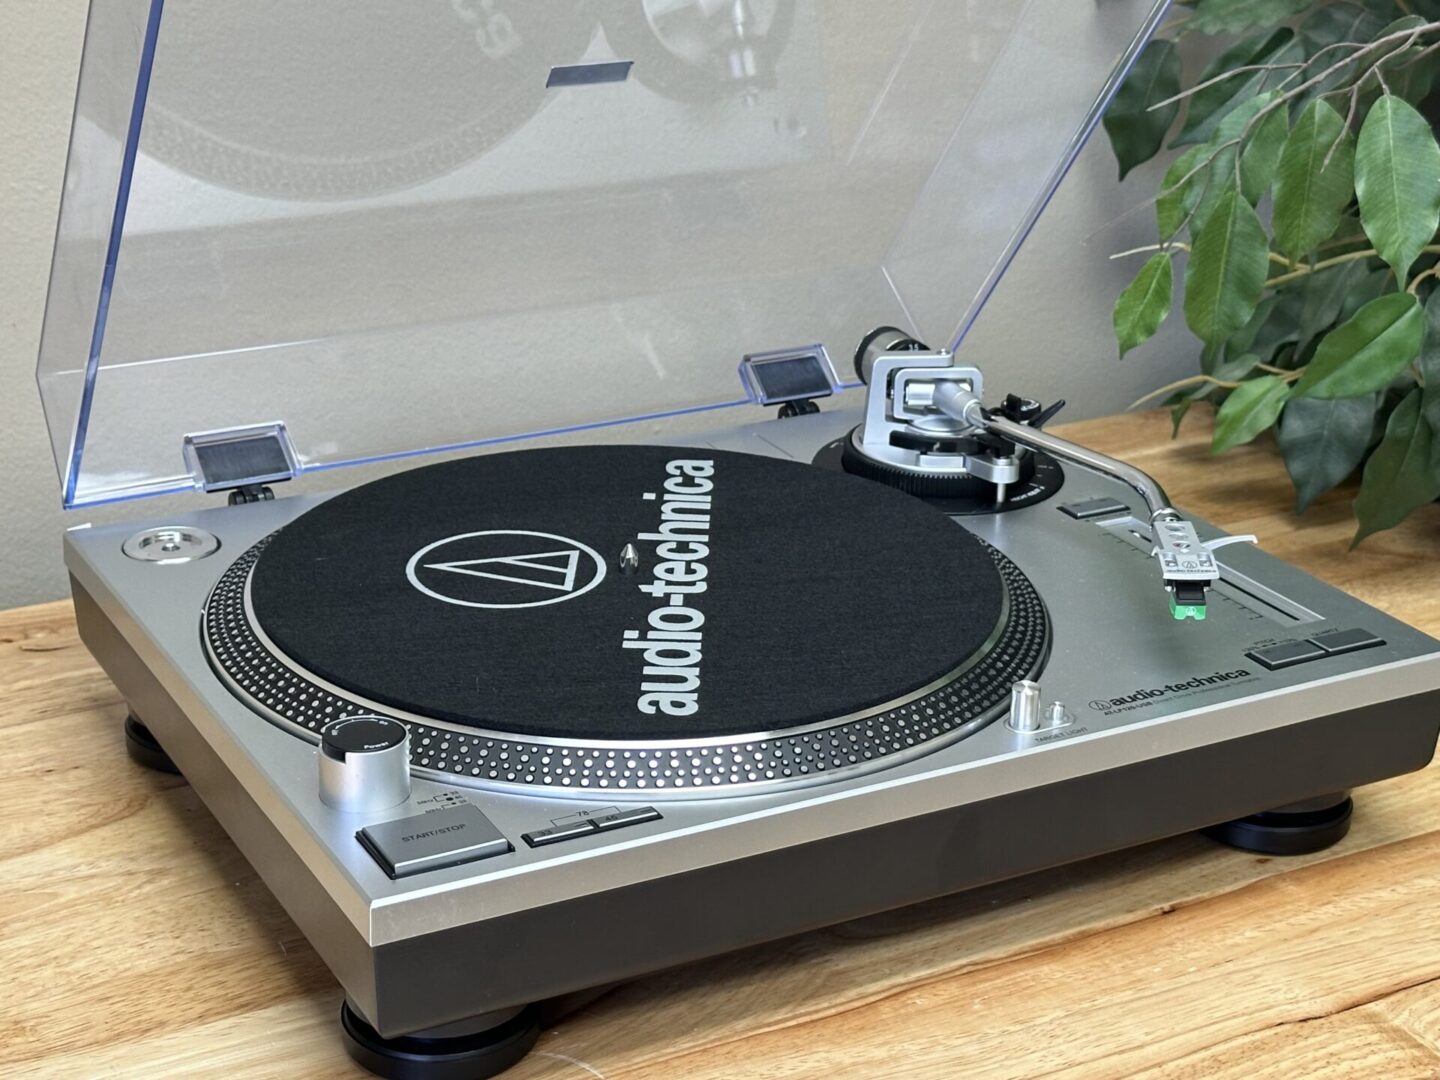 A turntable record player on a wooden surface.